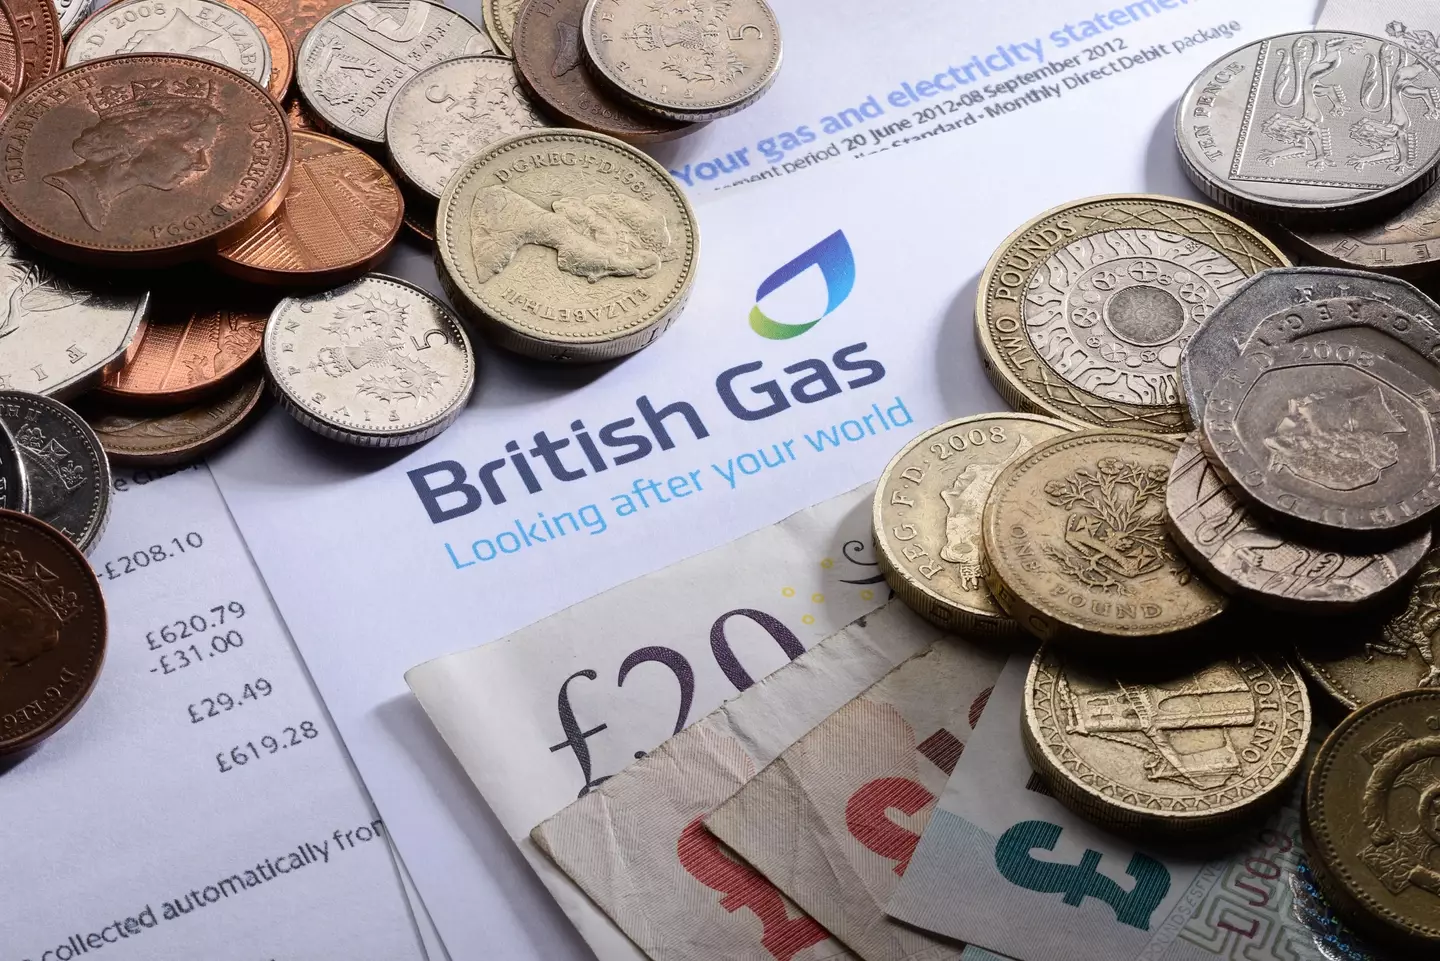 British Gas customers can claim up to £750 towards their energy bills.